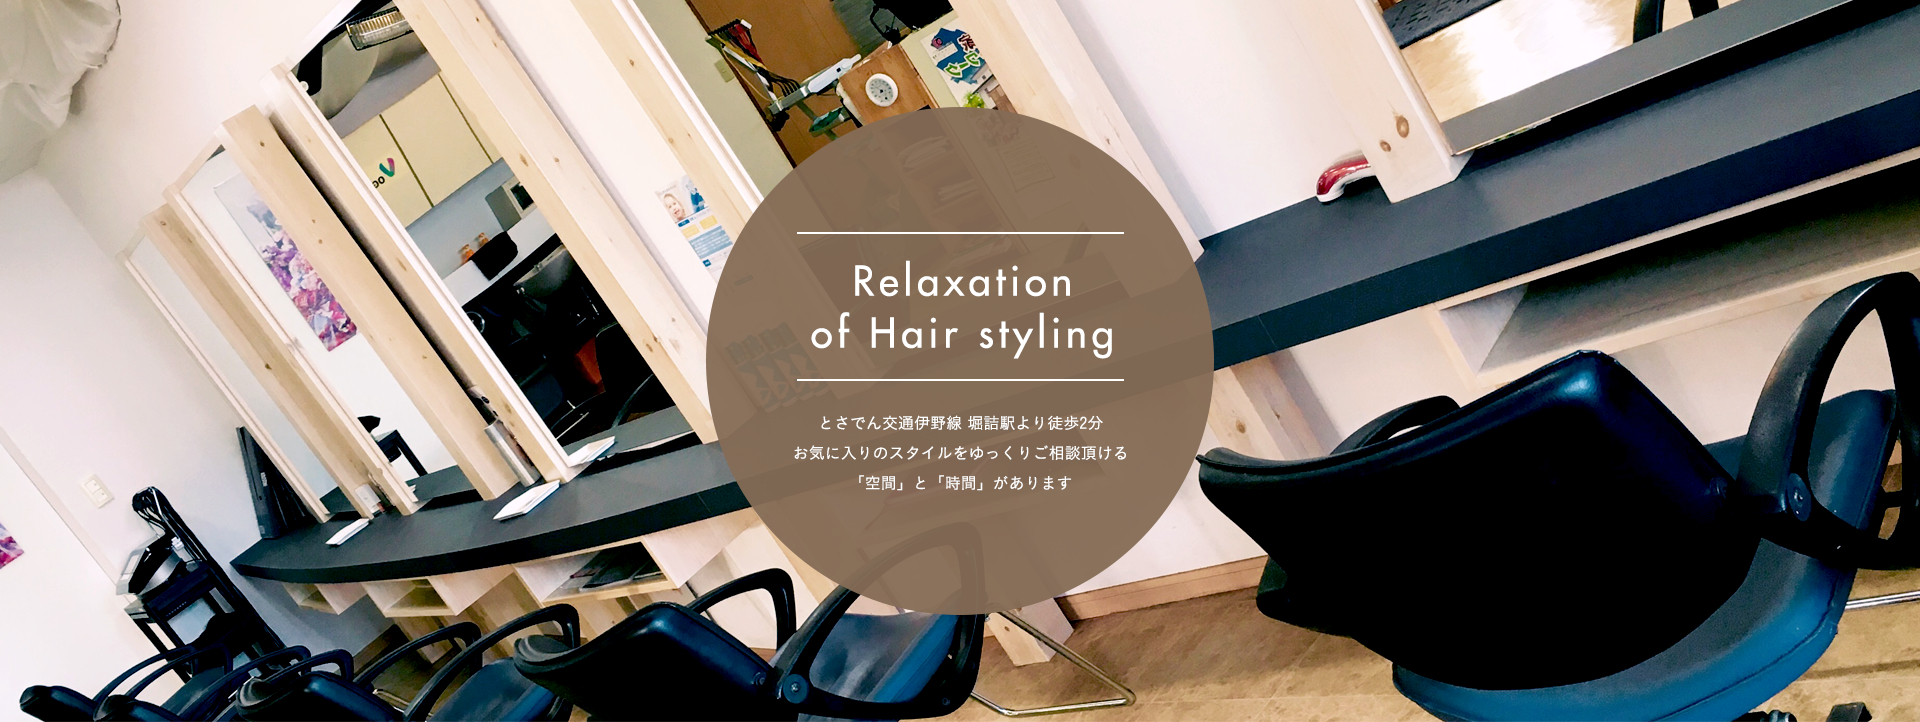 Relaxation　of　Hair styling